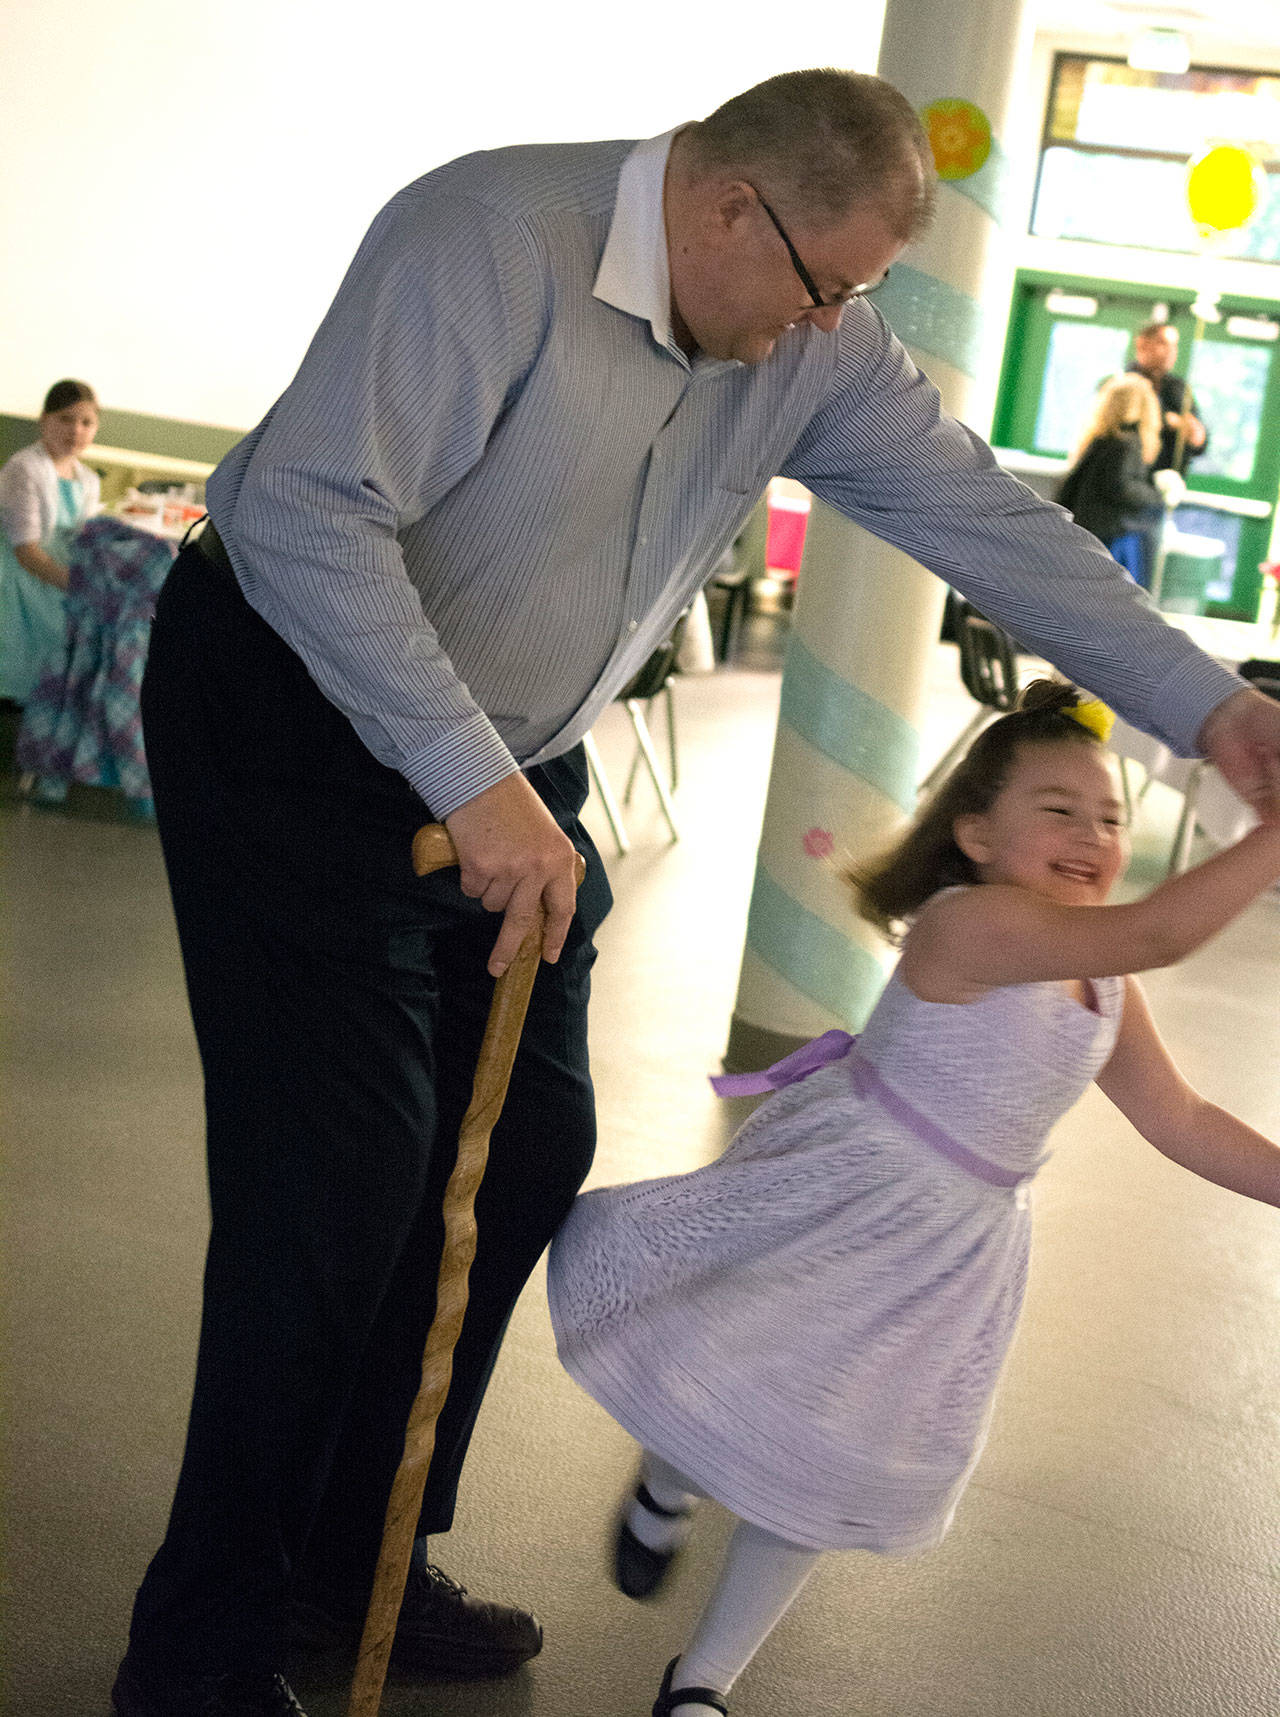 Mayor Jeff Wagner danced with his three daughters during the Daddy Daughter Spring Fling.